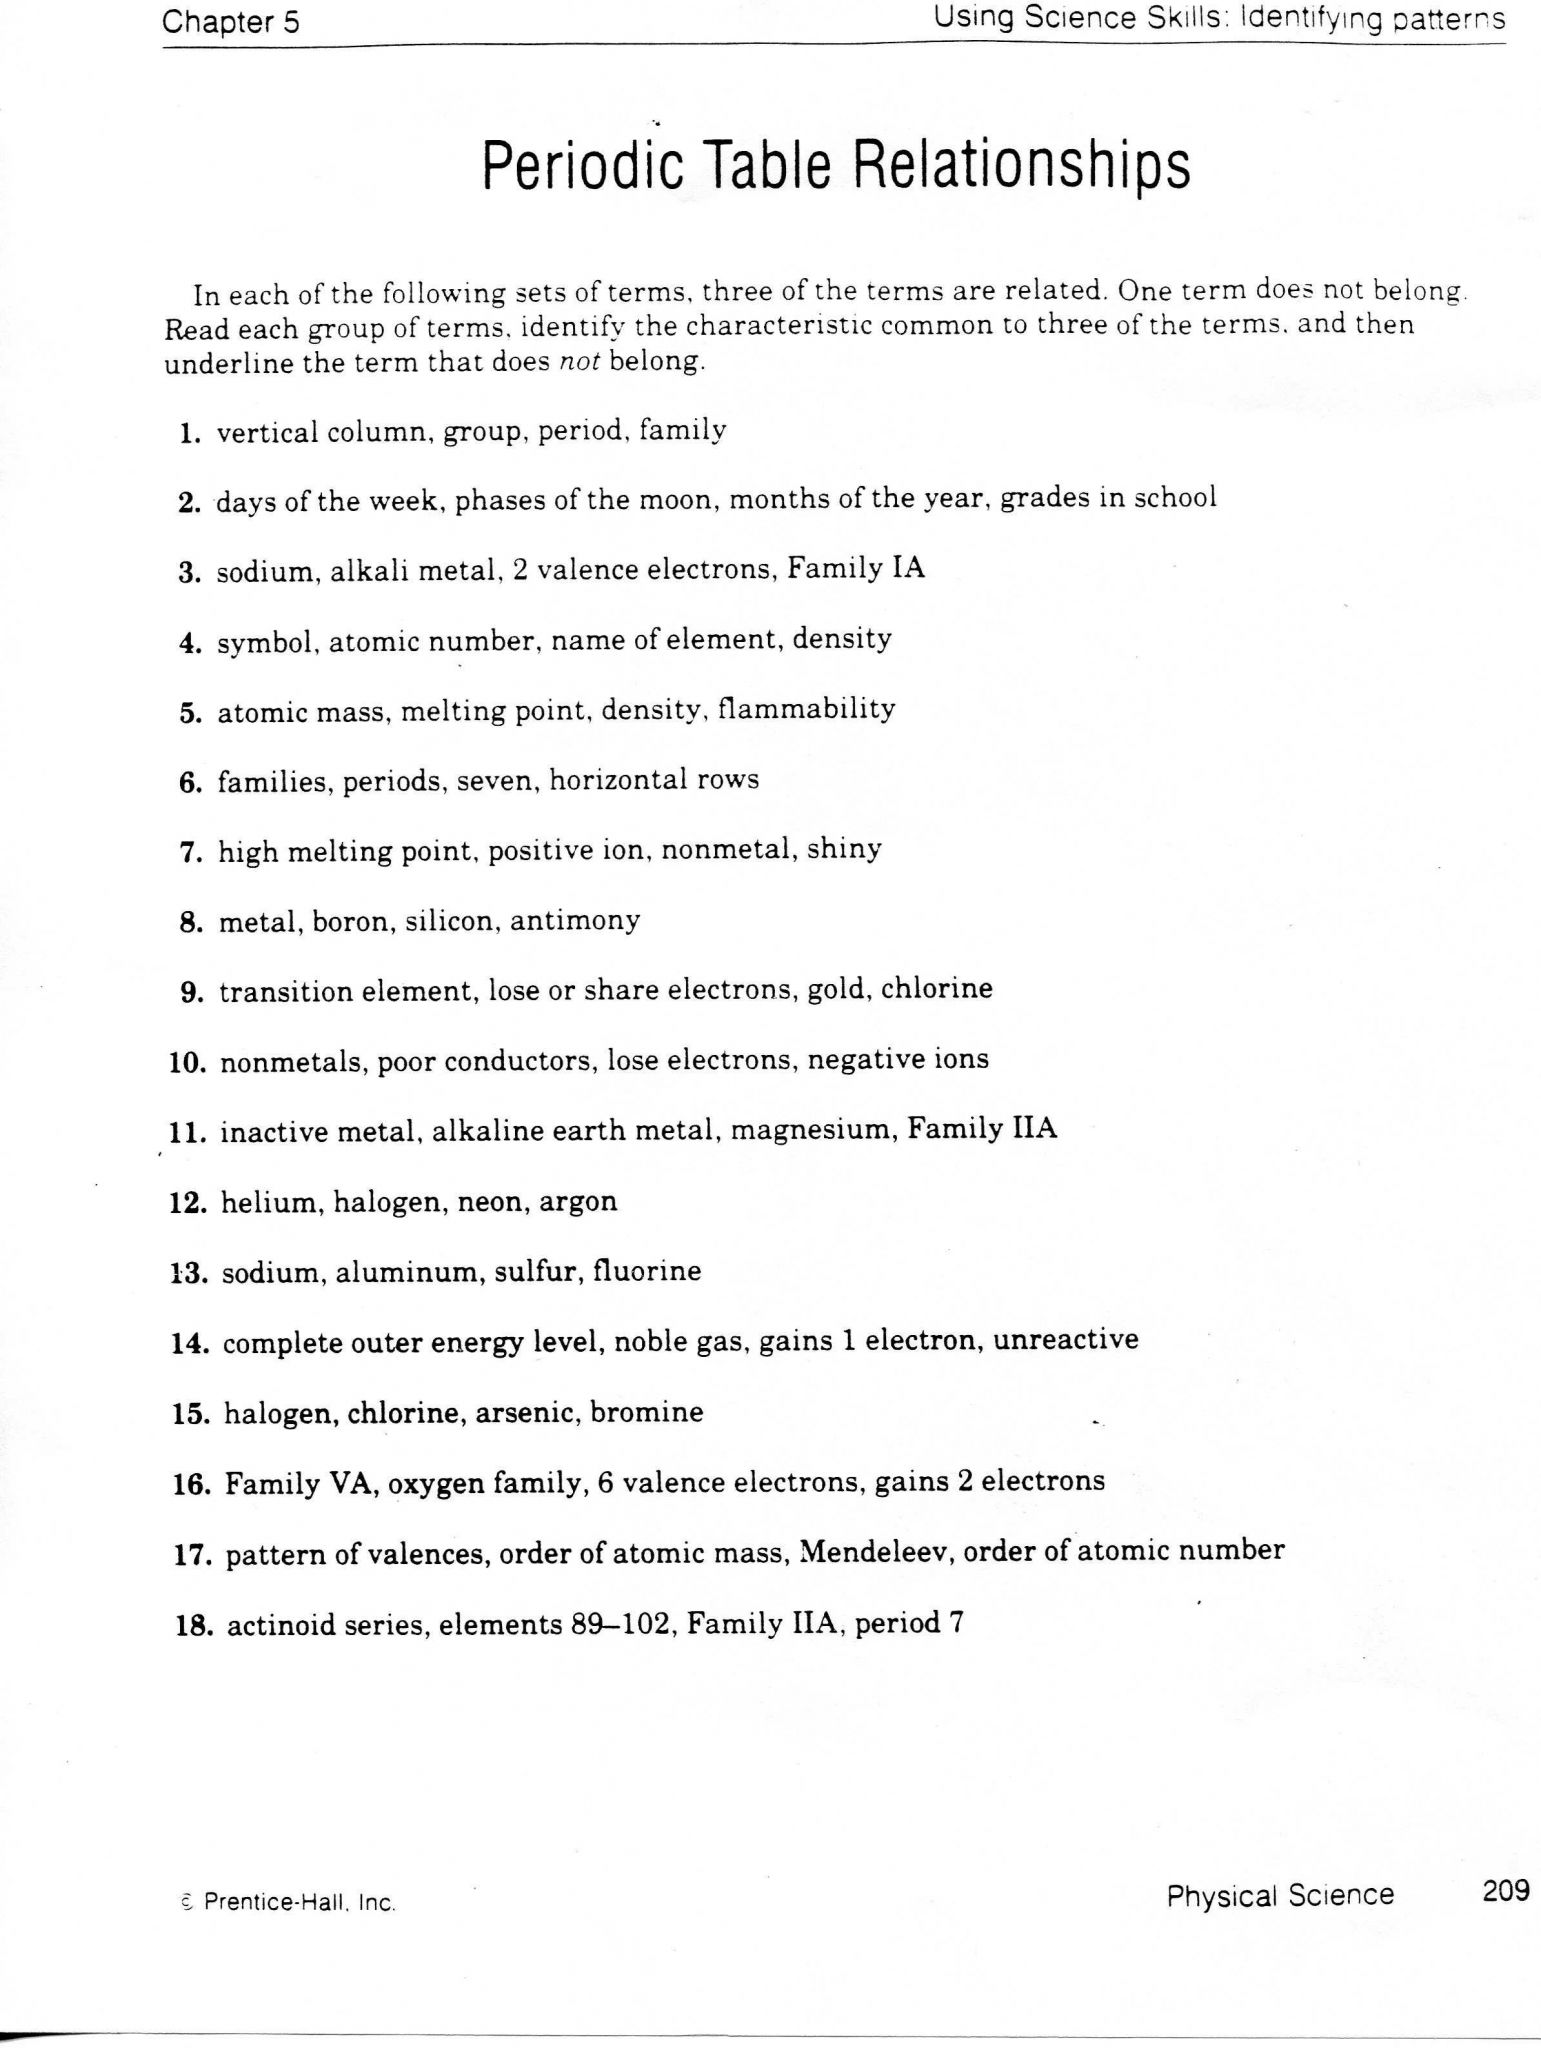 Subatomic Particles Worksheet Answer Key Along with Periodic Table Questions New Chemistry Periodic Table Worksheet